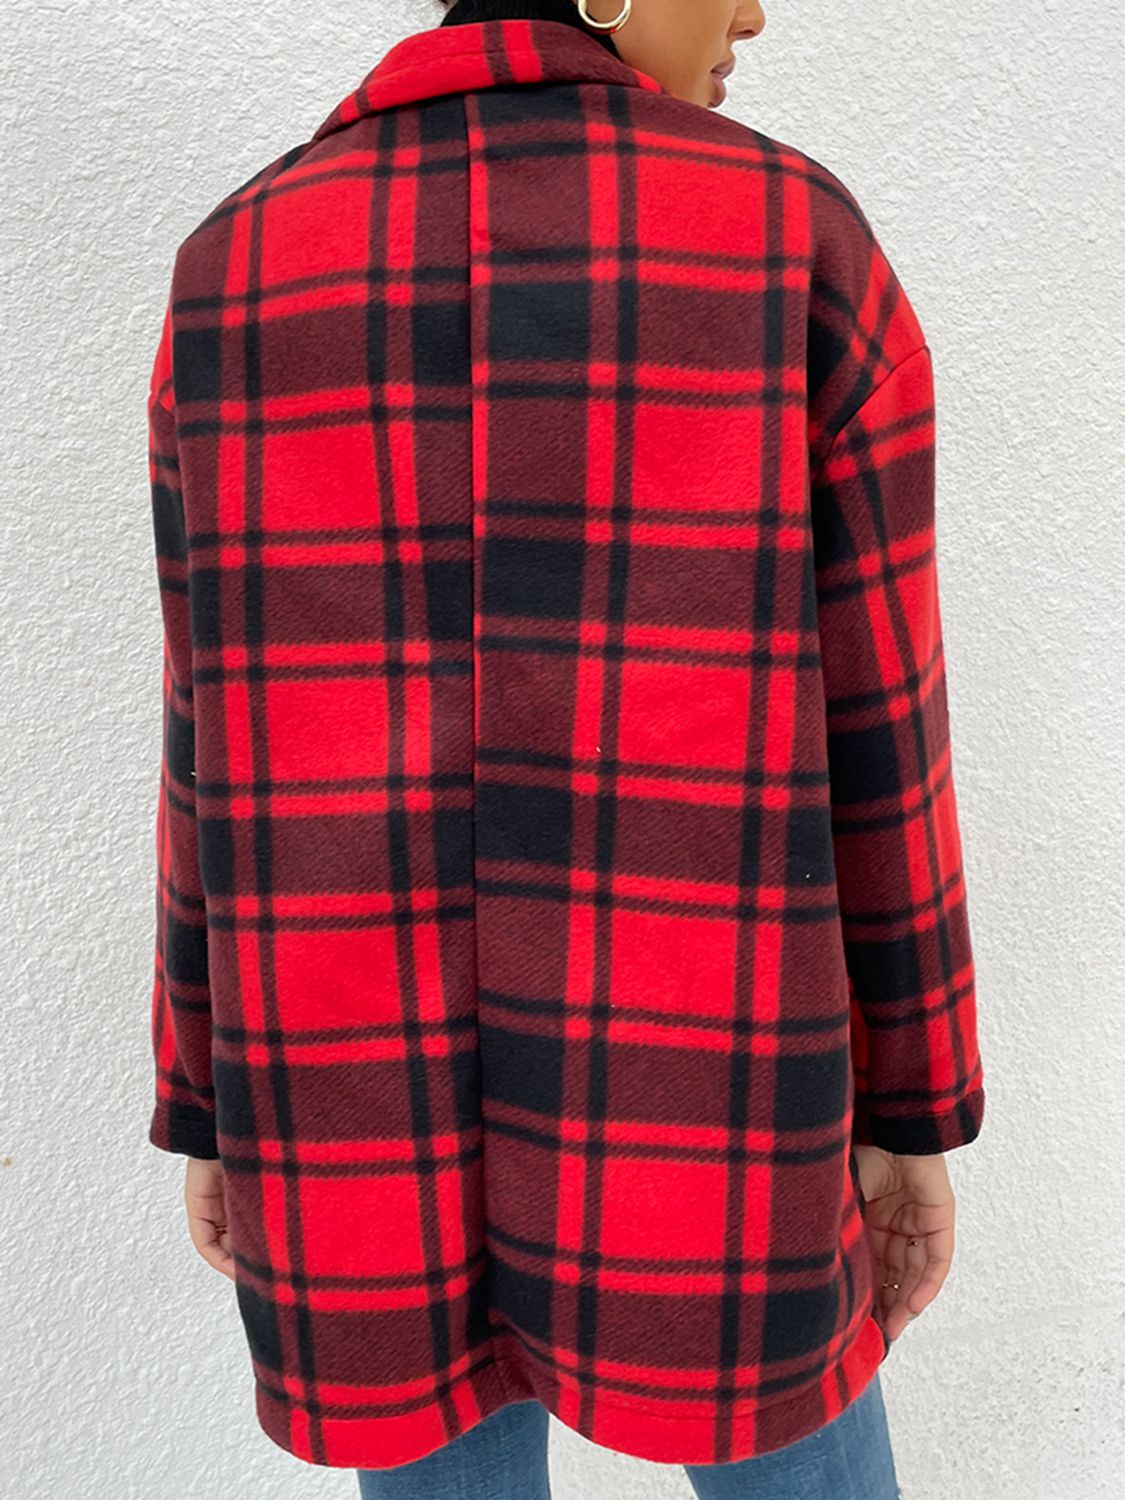 Plaid Lapel Collar Coat with Pockets Print on any thing USA/STOD clothes